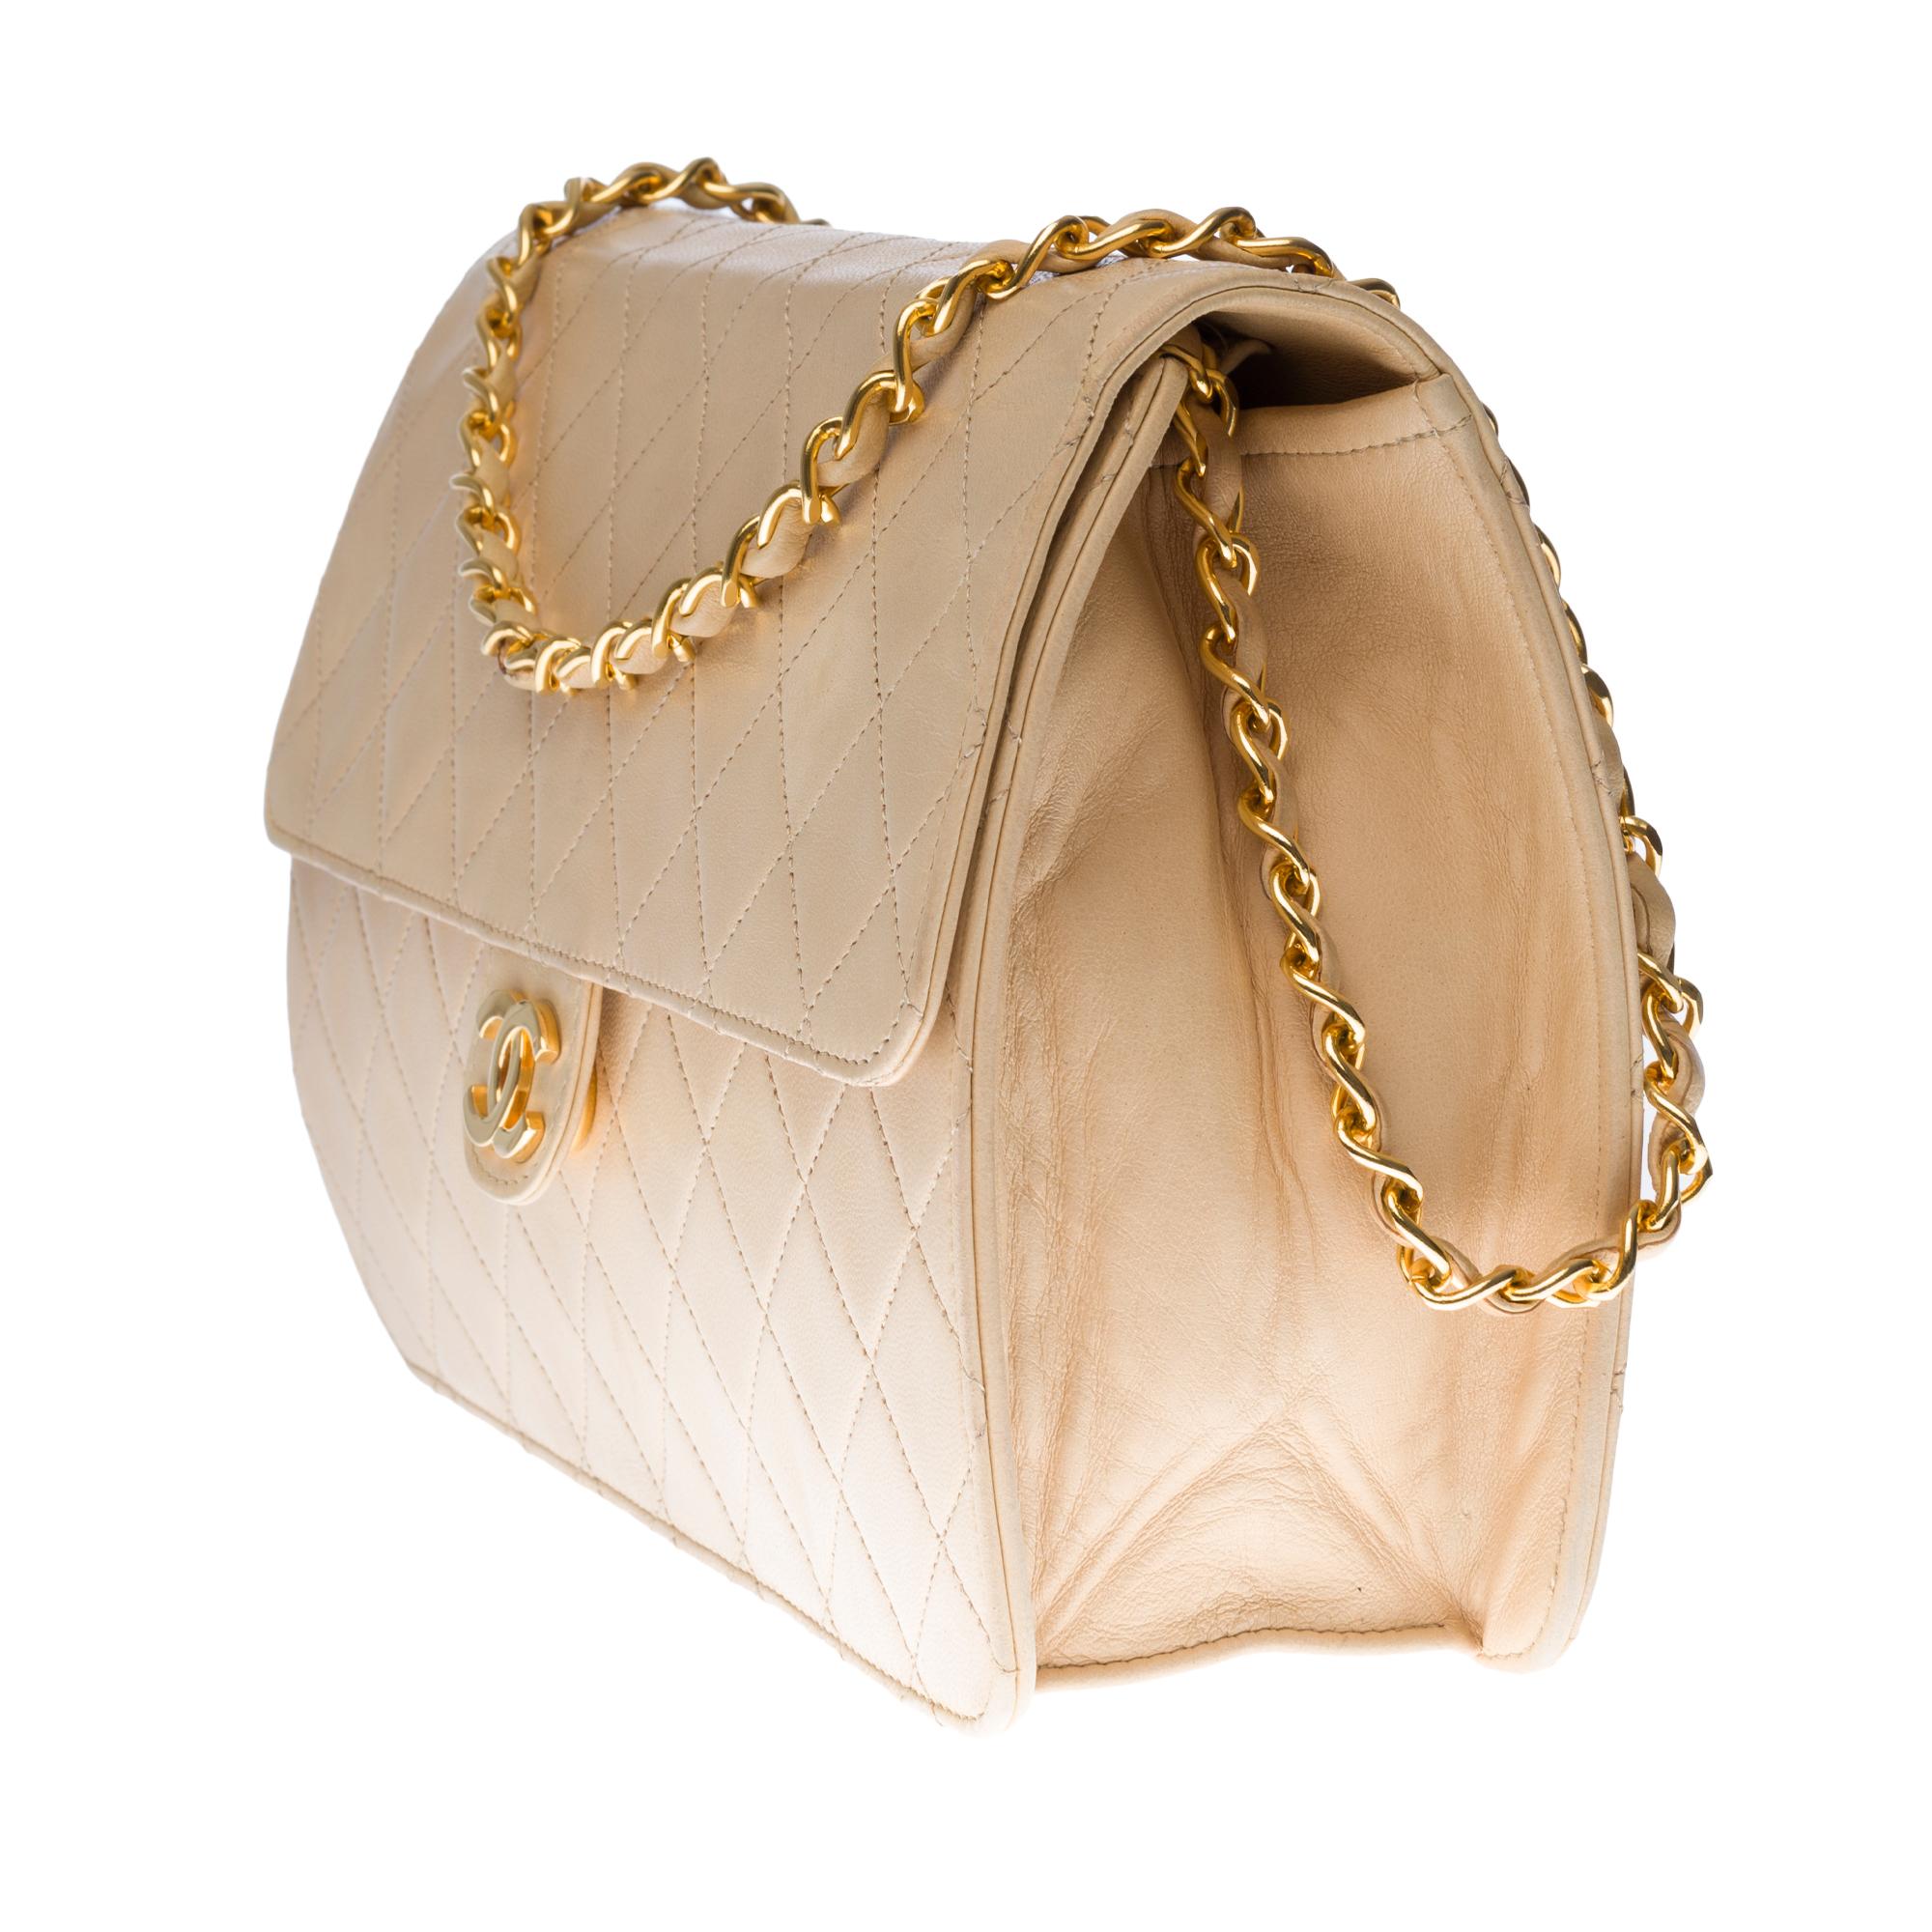 Beige Chanel Classic 25cm shoulder bag in beige quilted lambskin and gold hardware